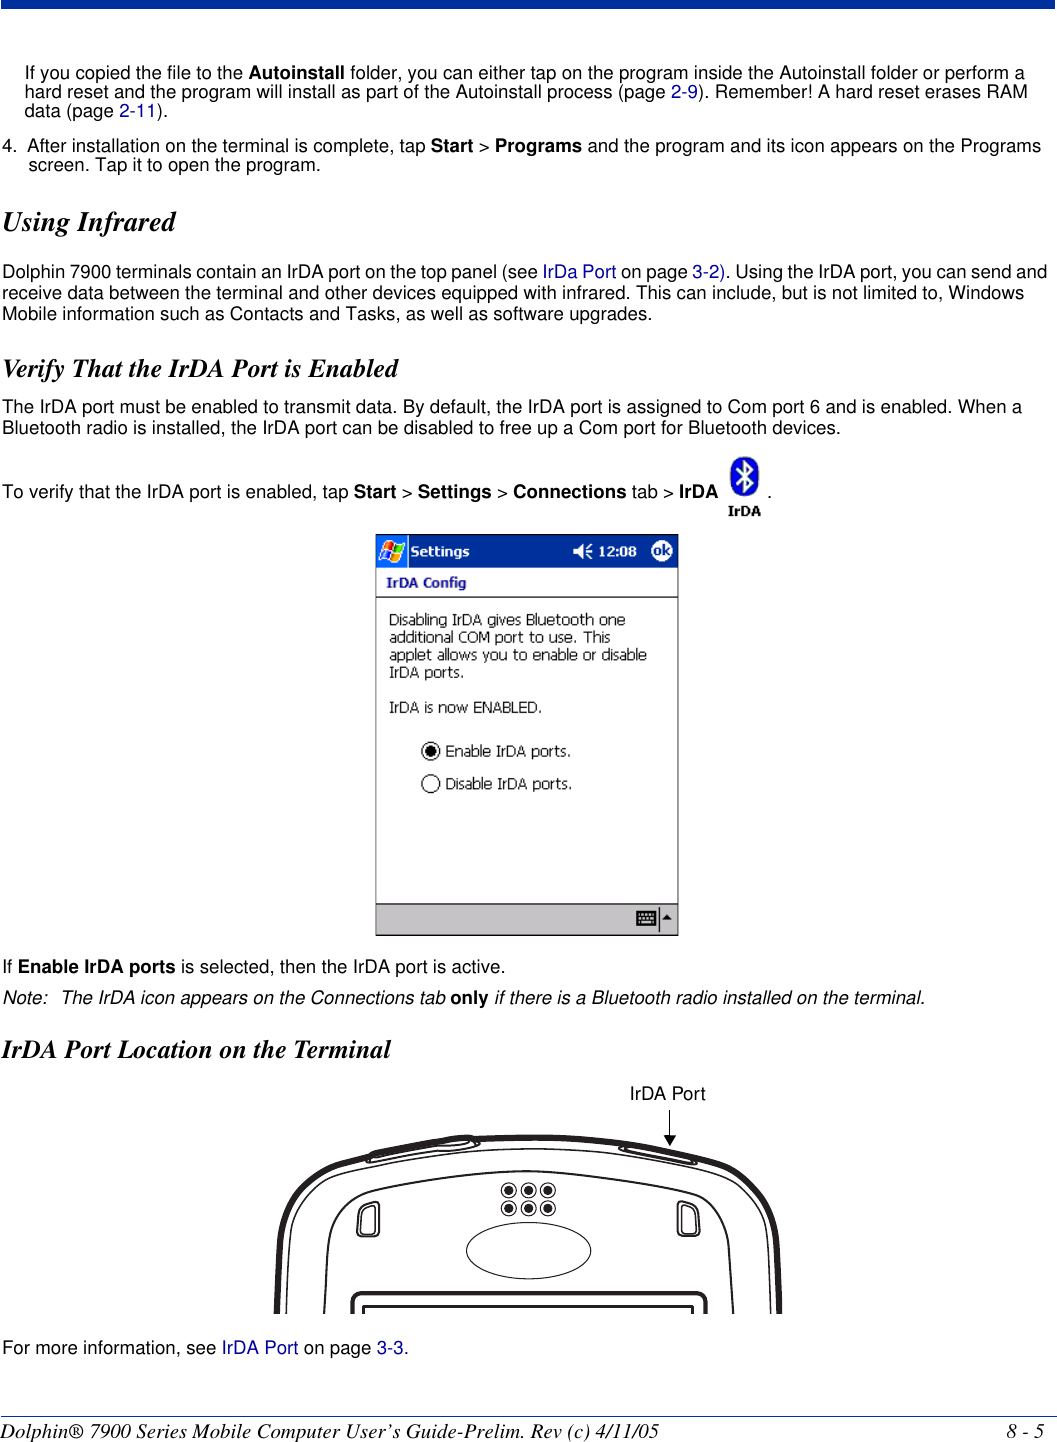 Dolphin® 7900 Series Mobile Computer User’s Guide-Prelim. Rev (c) 4/11/05 8 - 5If you copied the file to the Autoinstall folder, you can either tap on the program inside the Autoinstall folder or perform a hard reset and the program will install as part of the Autoinstall process (page 2-9). Remember! A hard reset erases RAM data (page 2-11).4. After installation on the terminal is complete, tap Start &gt; Programs and the program and its icon appears on the Programs screen. Tap it to open the program.Using InfraredDolphin 7900 terminals contain an IrDA port on the top panel (see IrDa Port on page 3-2). Using the IrDA port, you can send and receive data between the terminal and other devices equipped with infrared. This can include, but is not limited to, Windows Mobile information such as Contacts and Tasks, as well as software upgrades.Verify That the IrDA Port is EnabledThe IrDA port must be enabled to transmit data. By default, the IrDA port is assigned to Com port 6 and is enabled. When a Bluetooth radio is installed, the IrDA port can be disabled to free up a Com port for Bluetooth devices. To verify that the IrDA port is enabled, tap Start &gt; Settings &gt; Connections tab &gt; IrDA  .If Enable IrDA ports is selected, then the IrDA port is active.Note: The IrDA icon appears on the Connections tab only if there is a Bluetooth radio installed on the terminal.IrDA Port Location on the TerminalFor more information, see IrDA Port on page 3-3.IrDA Port